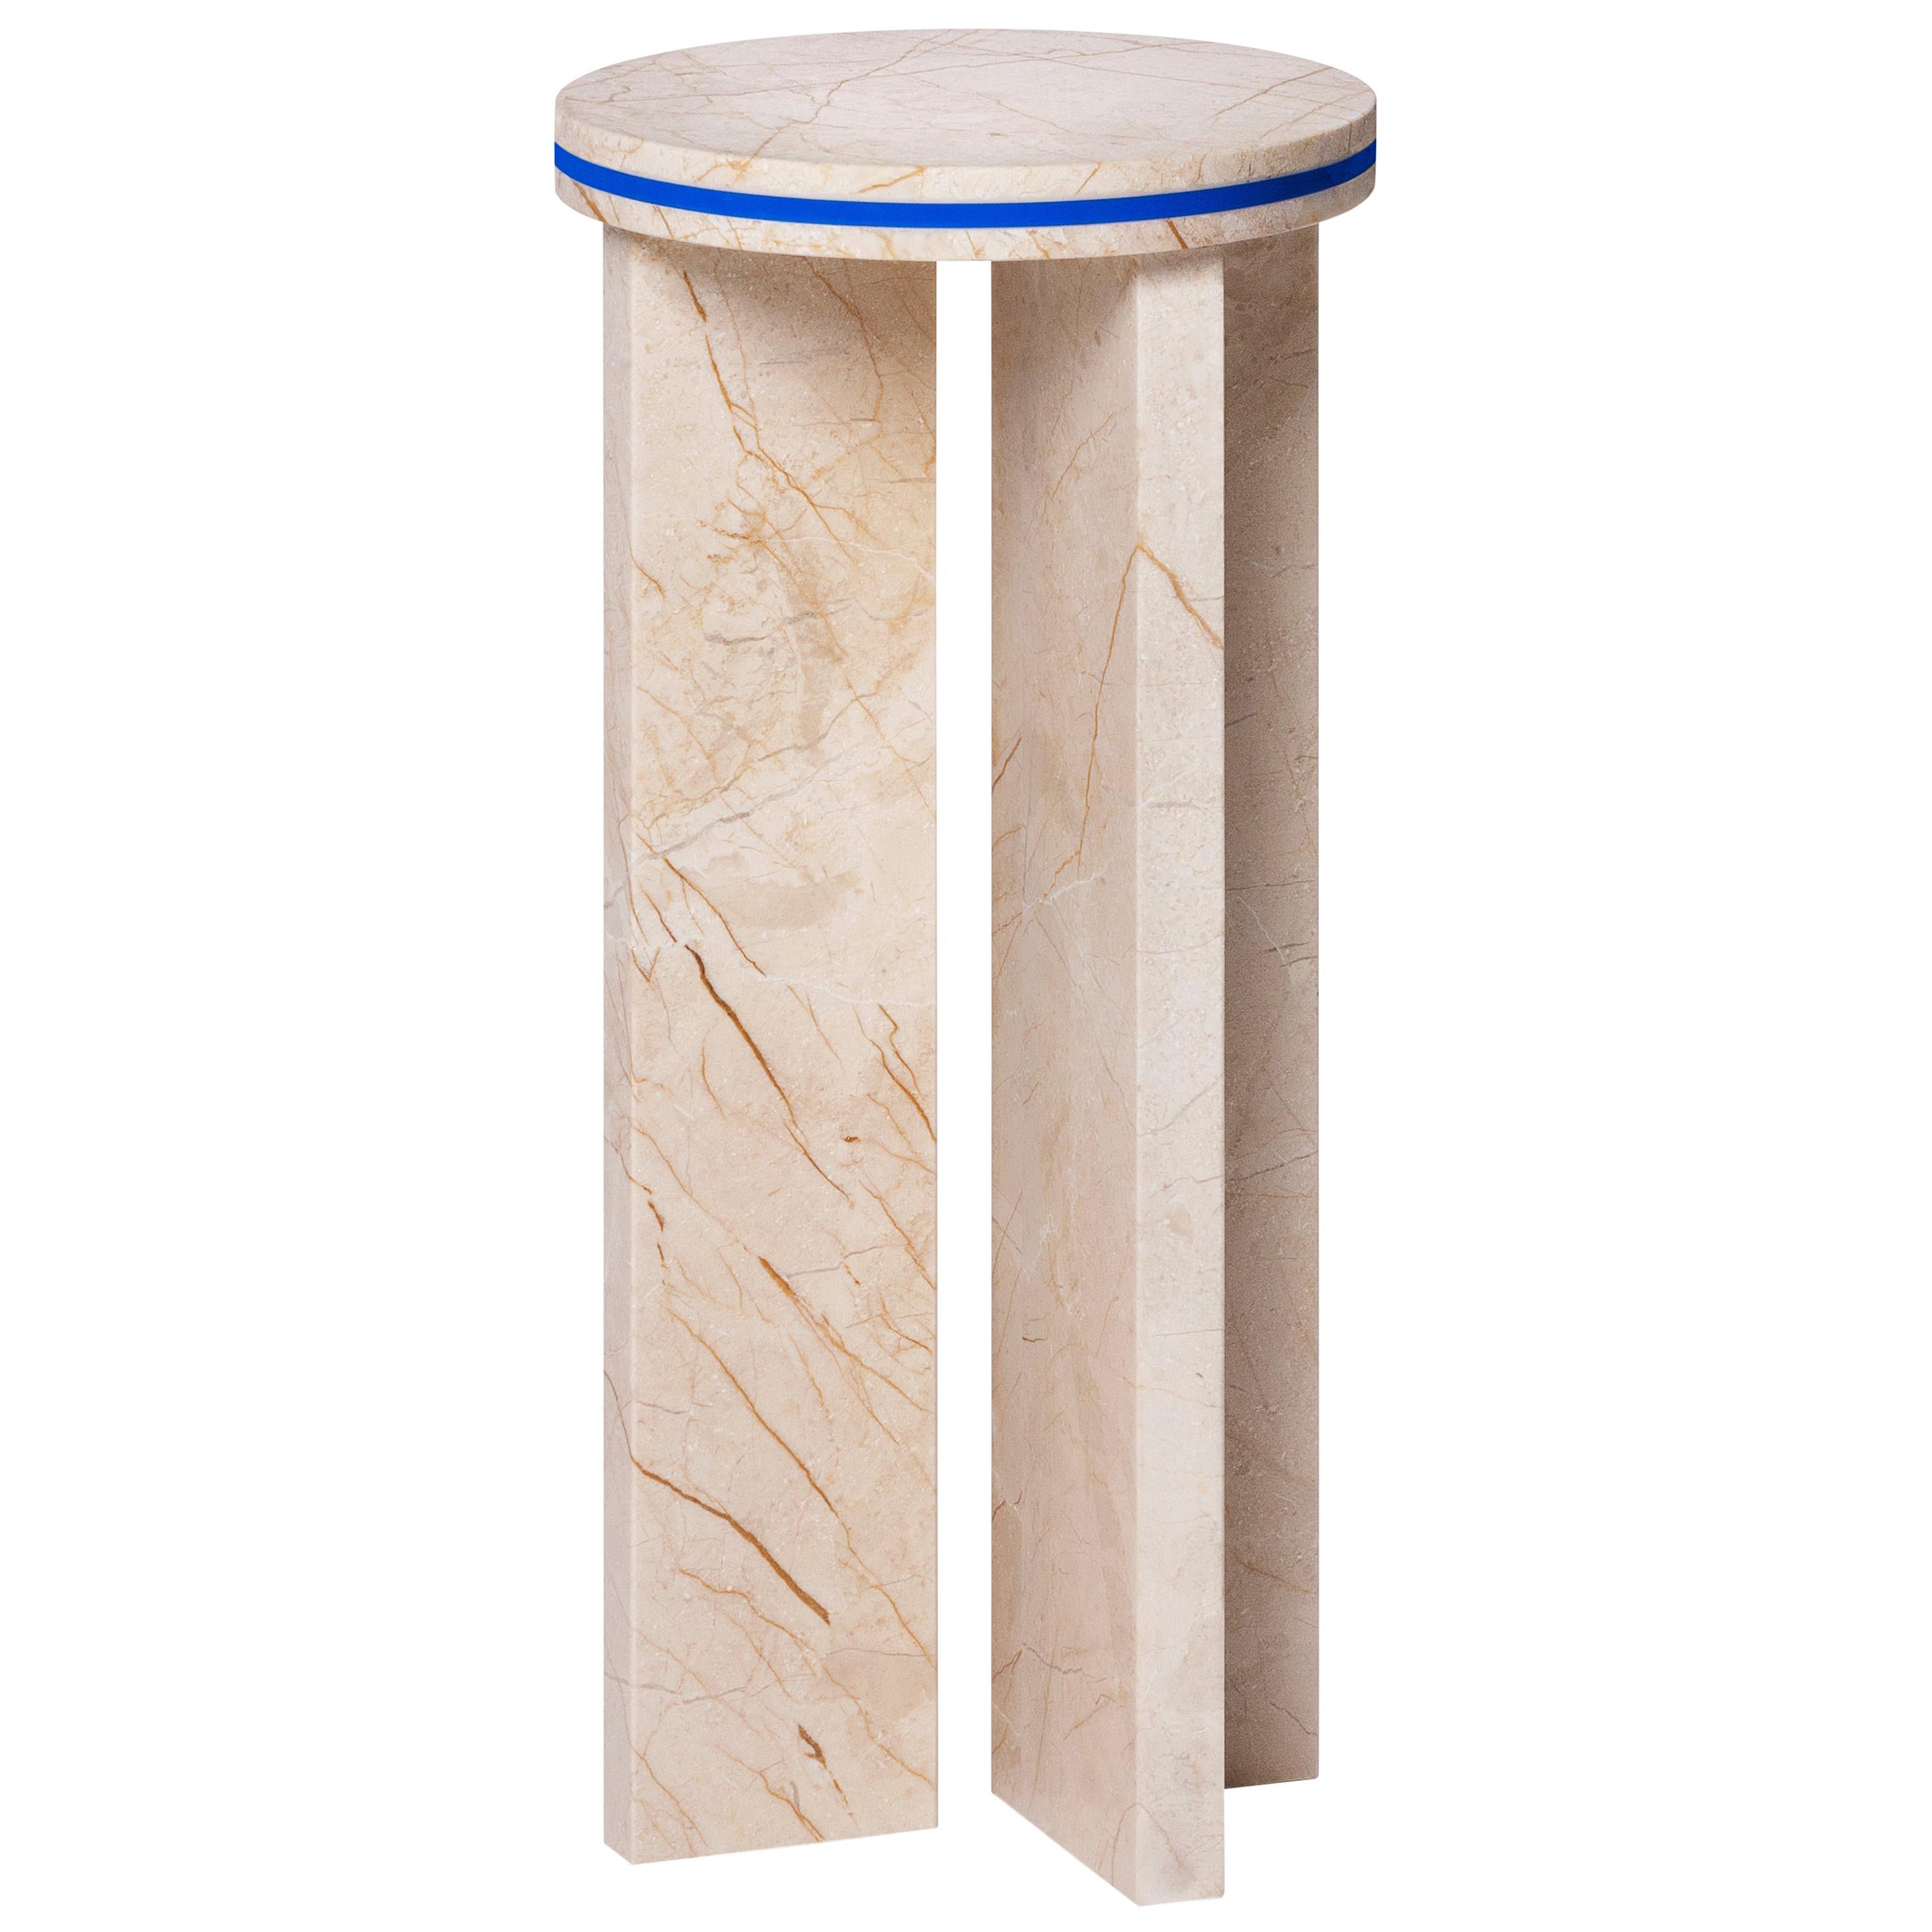 Buzao End Tables